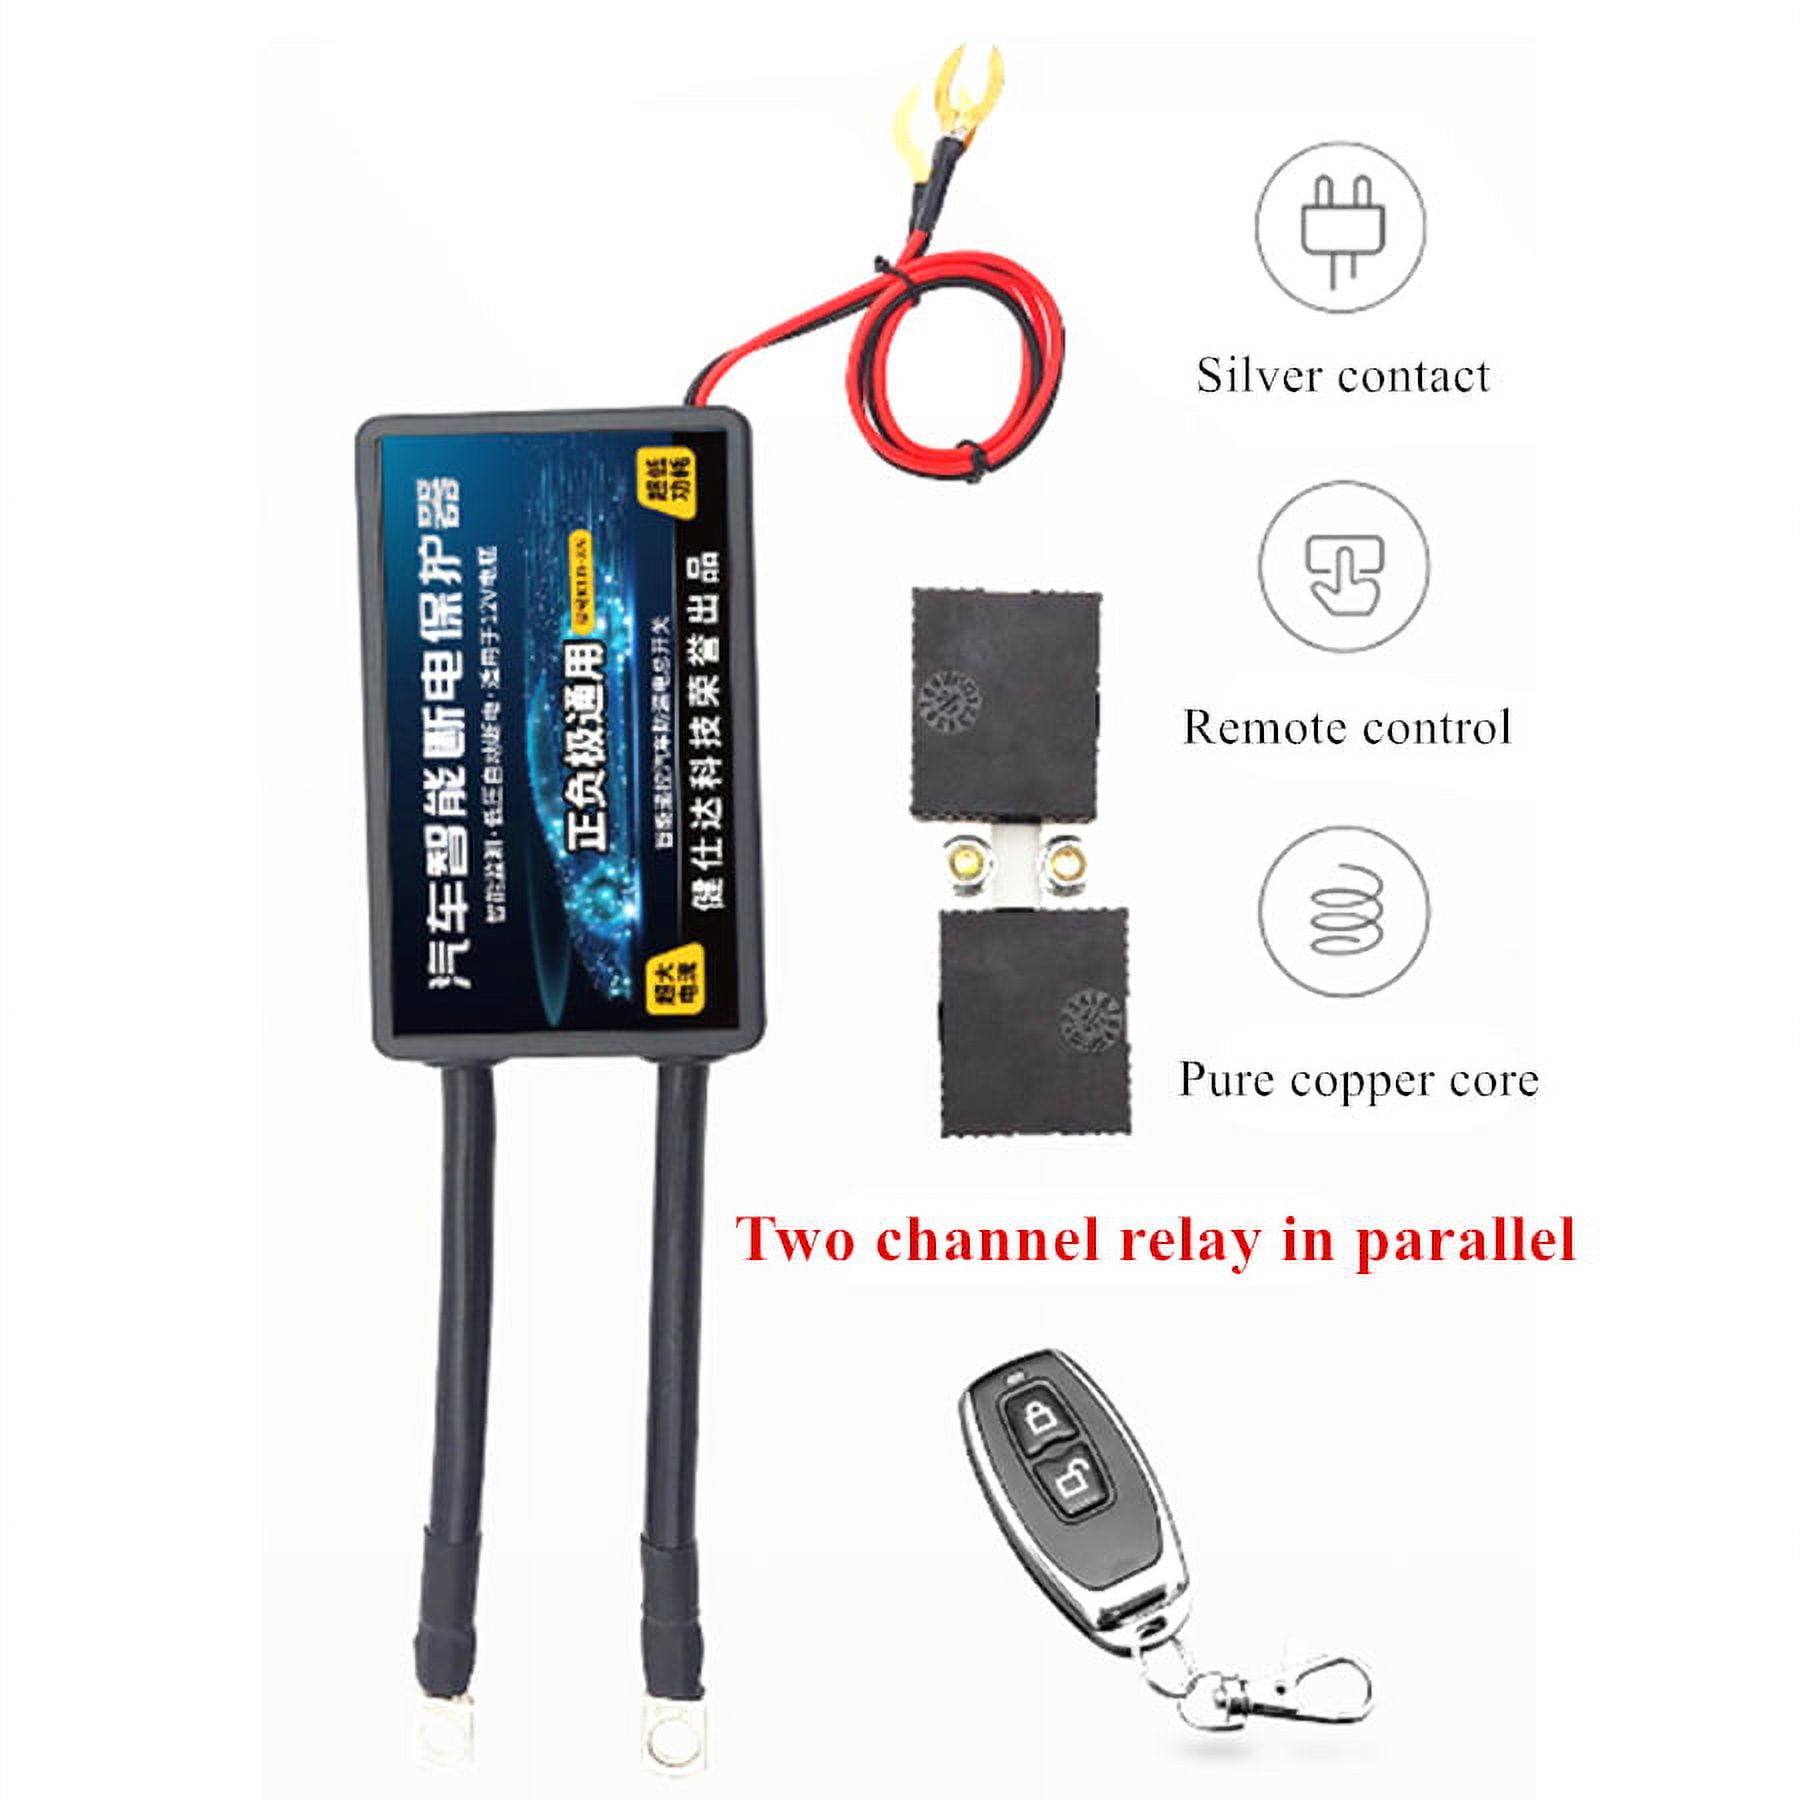 Remote Battery Disconnect Switch 12v 500a Battery Cut Switch Anti